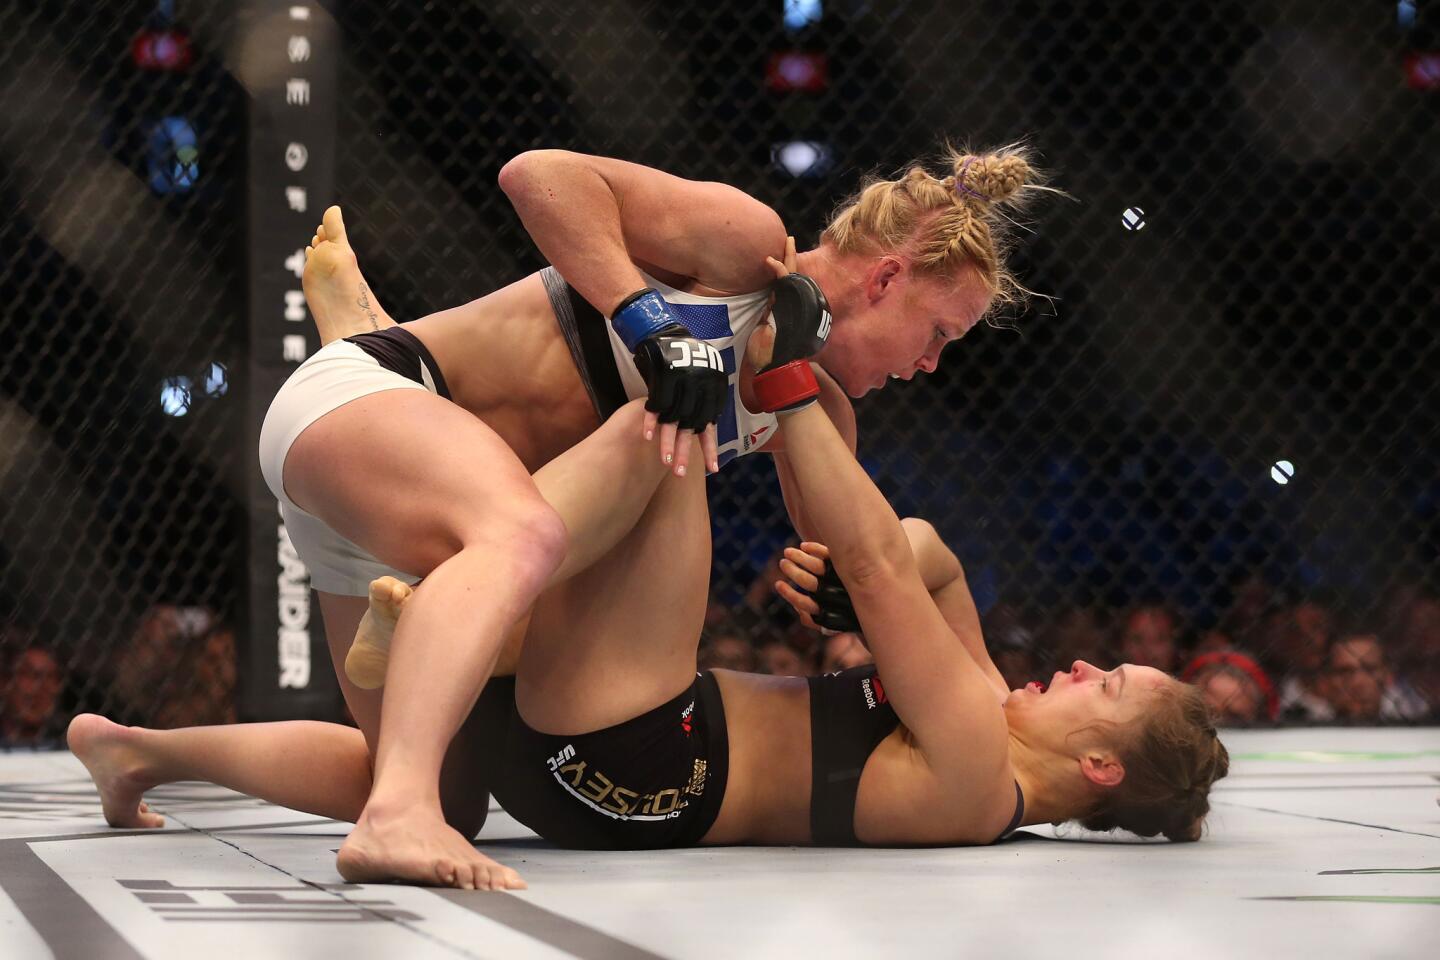 UFC 193: Rousey vs Holm